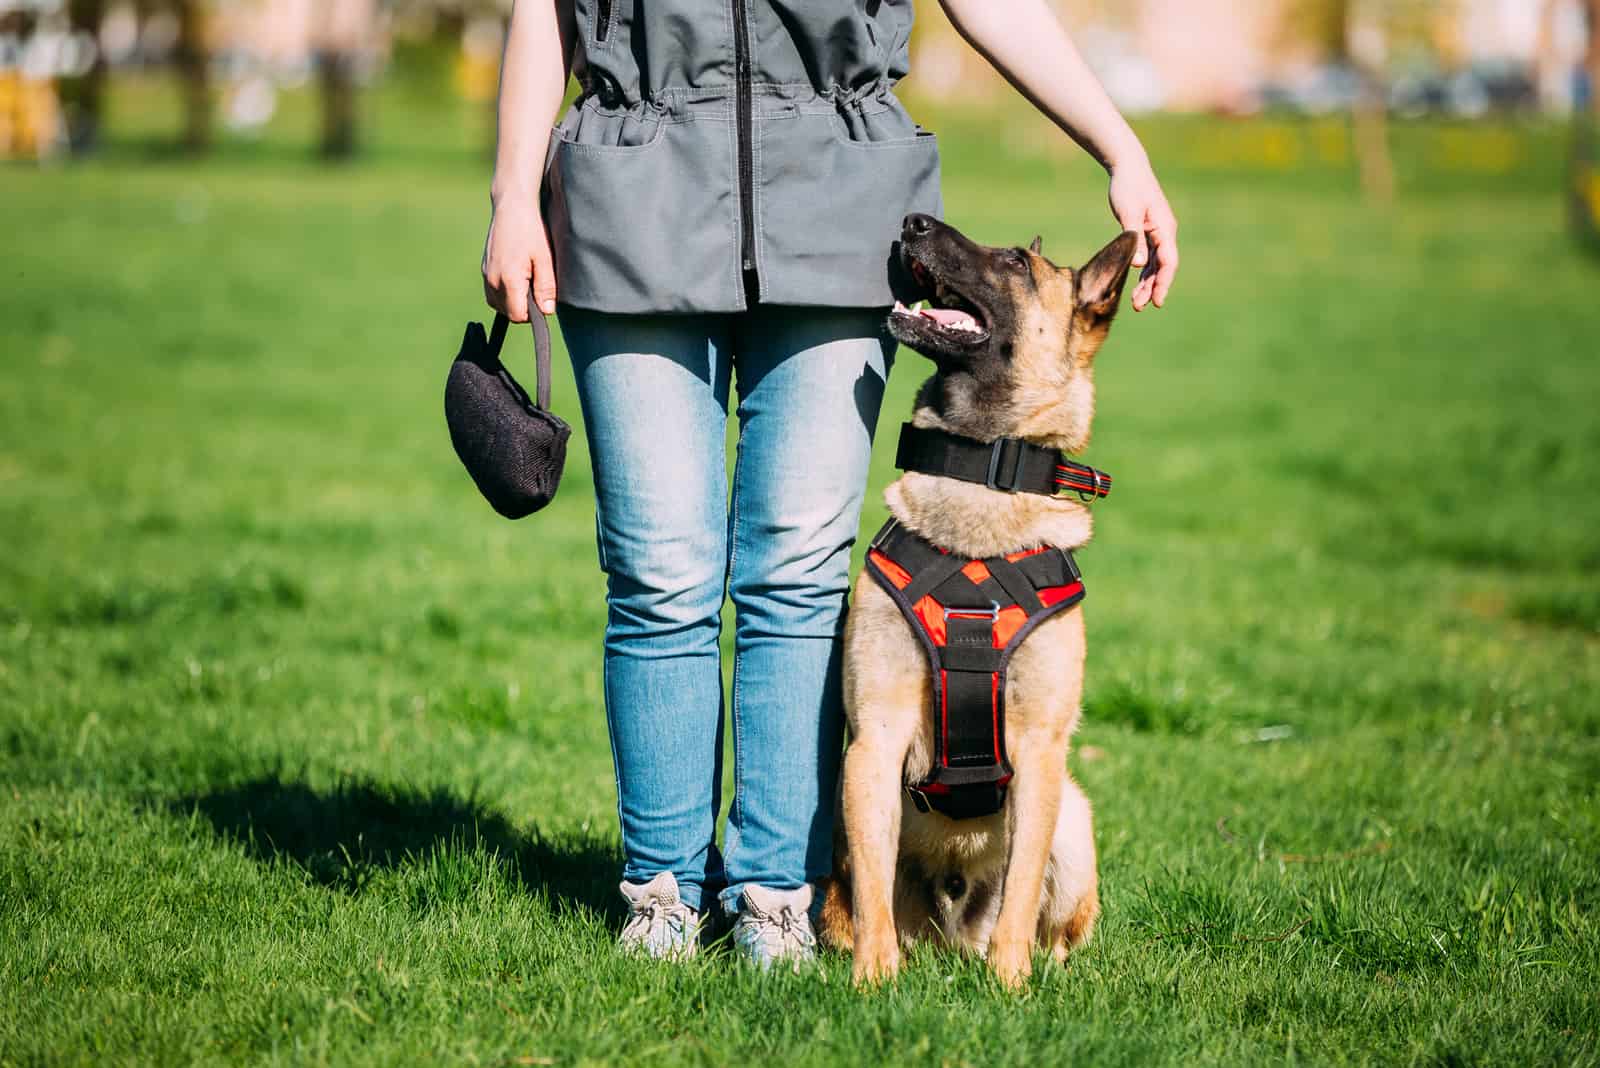 Malinois Dog with his owner outdoors